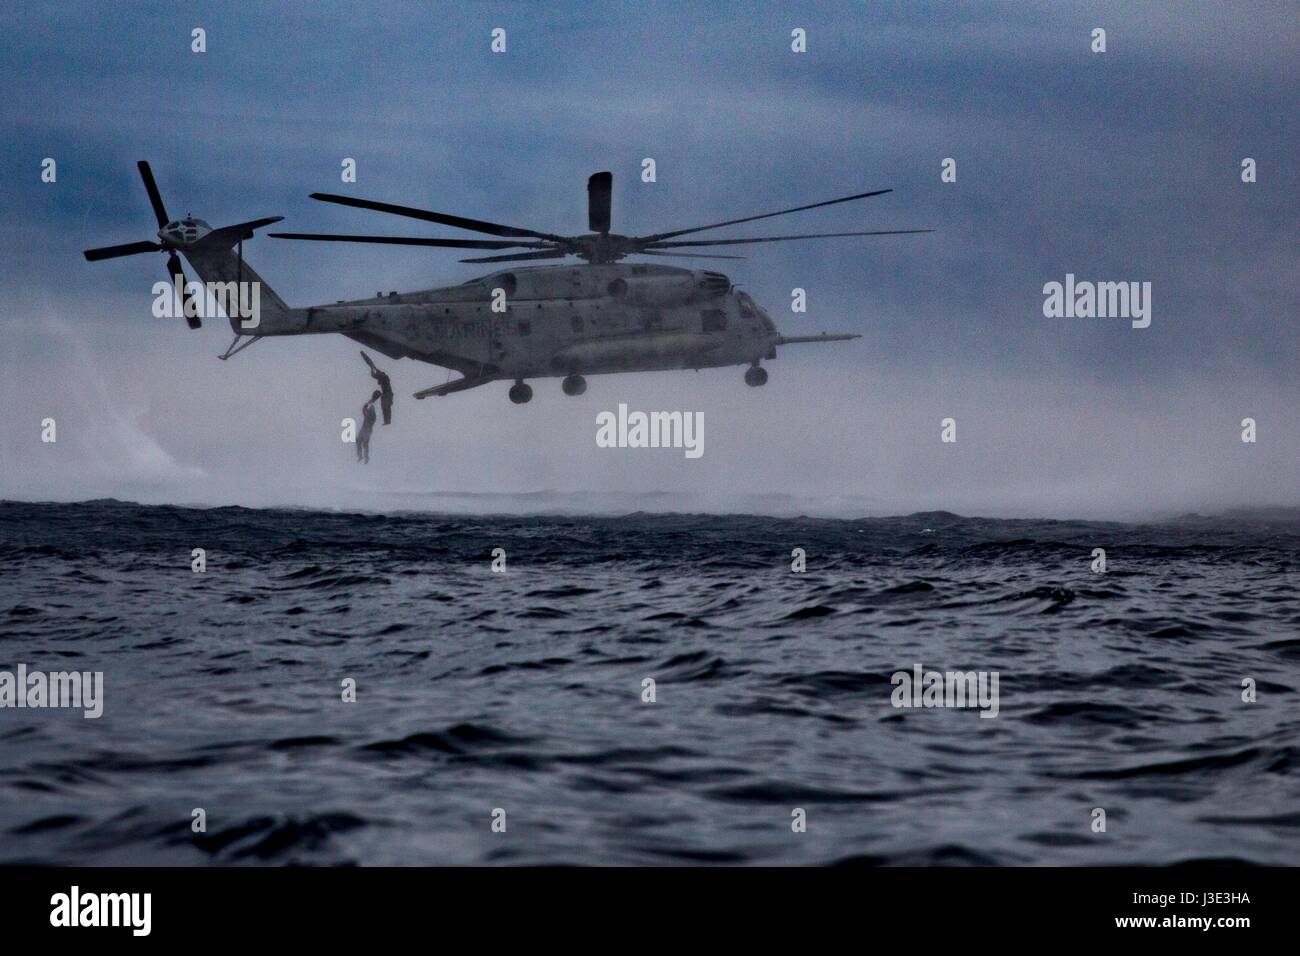 A USMC CH-53E Super Stallion helicopter releases U.S. Marine soldiers during a helocasting exercise March 19, 2017 in the Pacific Ocean.    (photo by Jona R. Meme/US Marines via Planetpix) Stock Photo